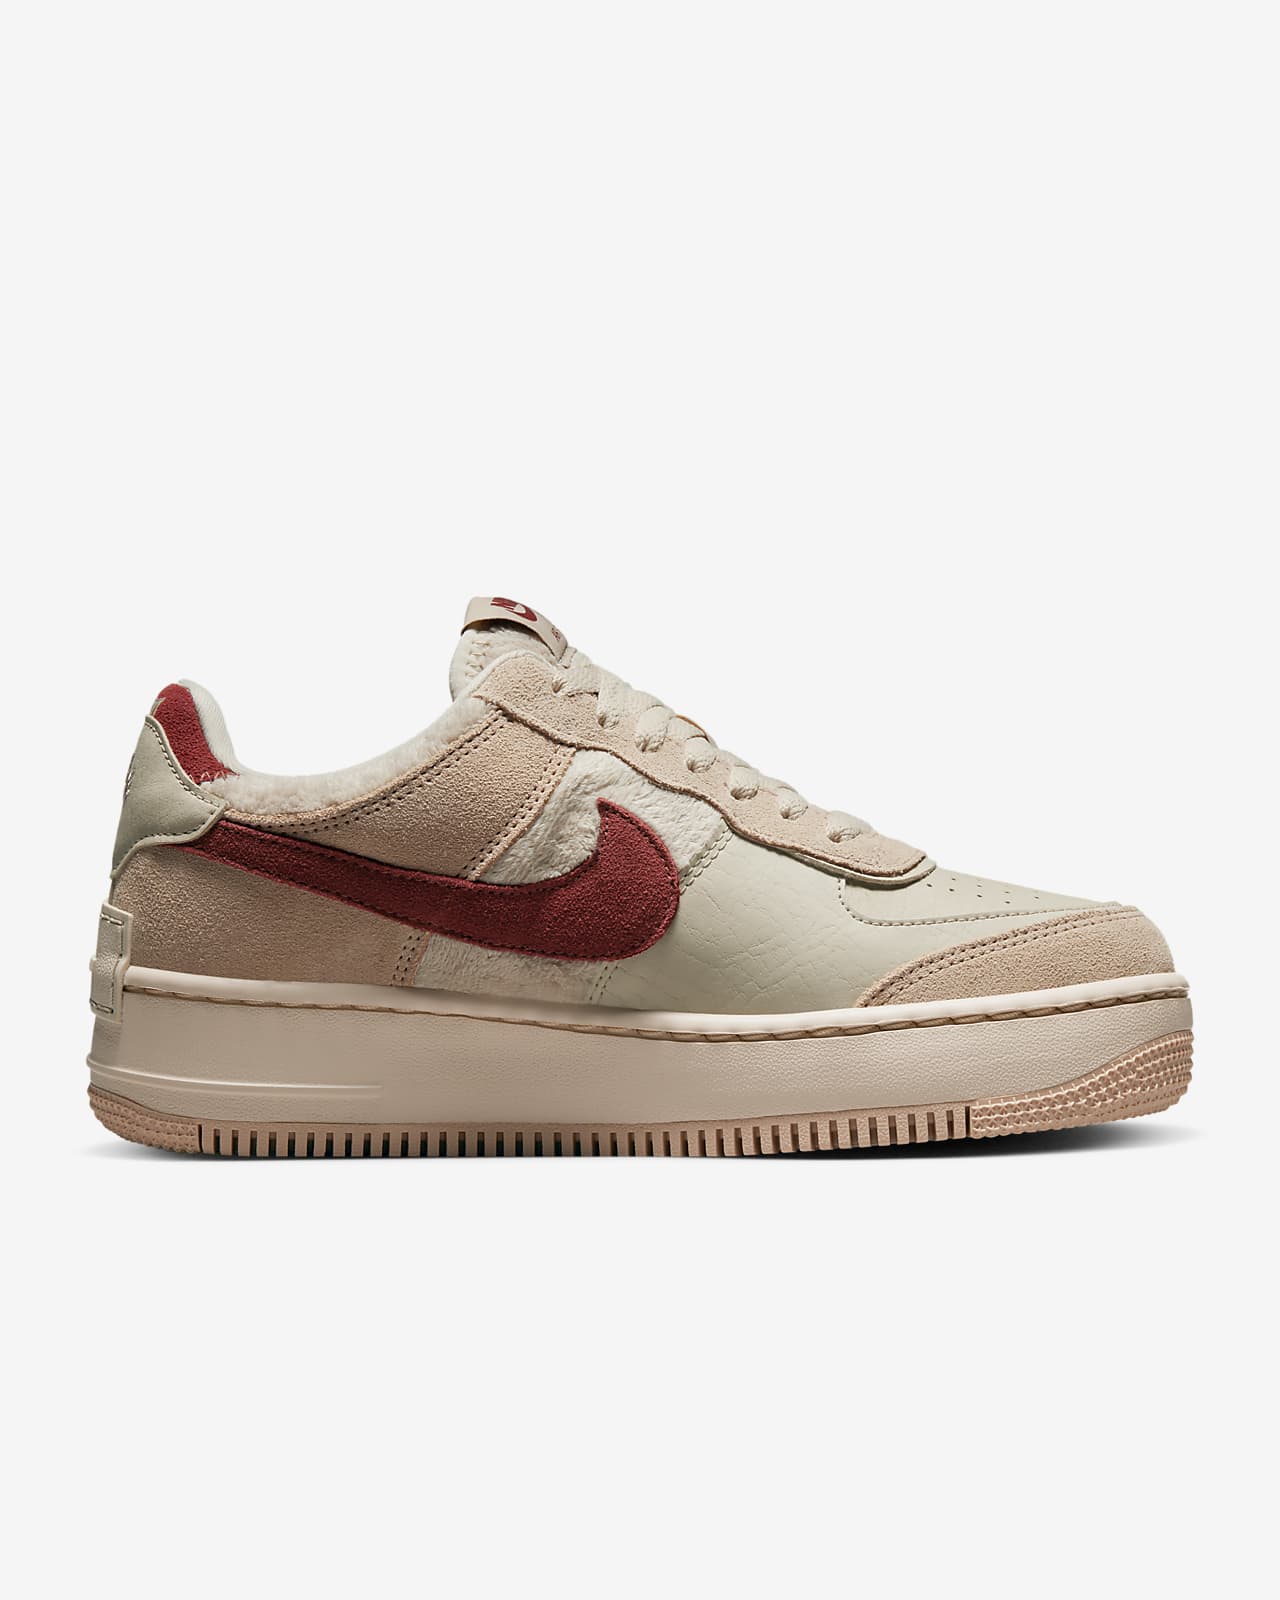 nike womens air force 1 shadow shoes